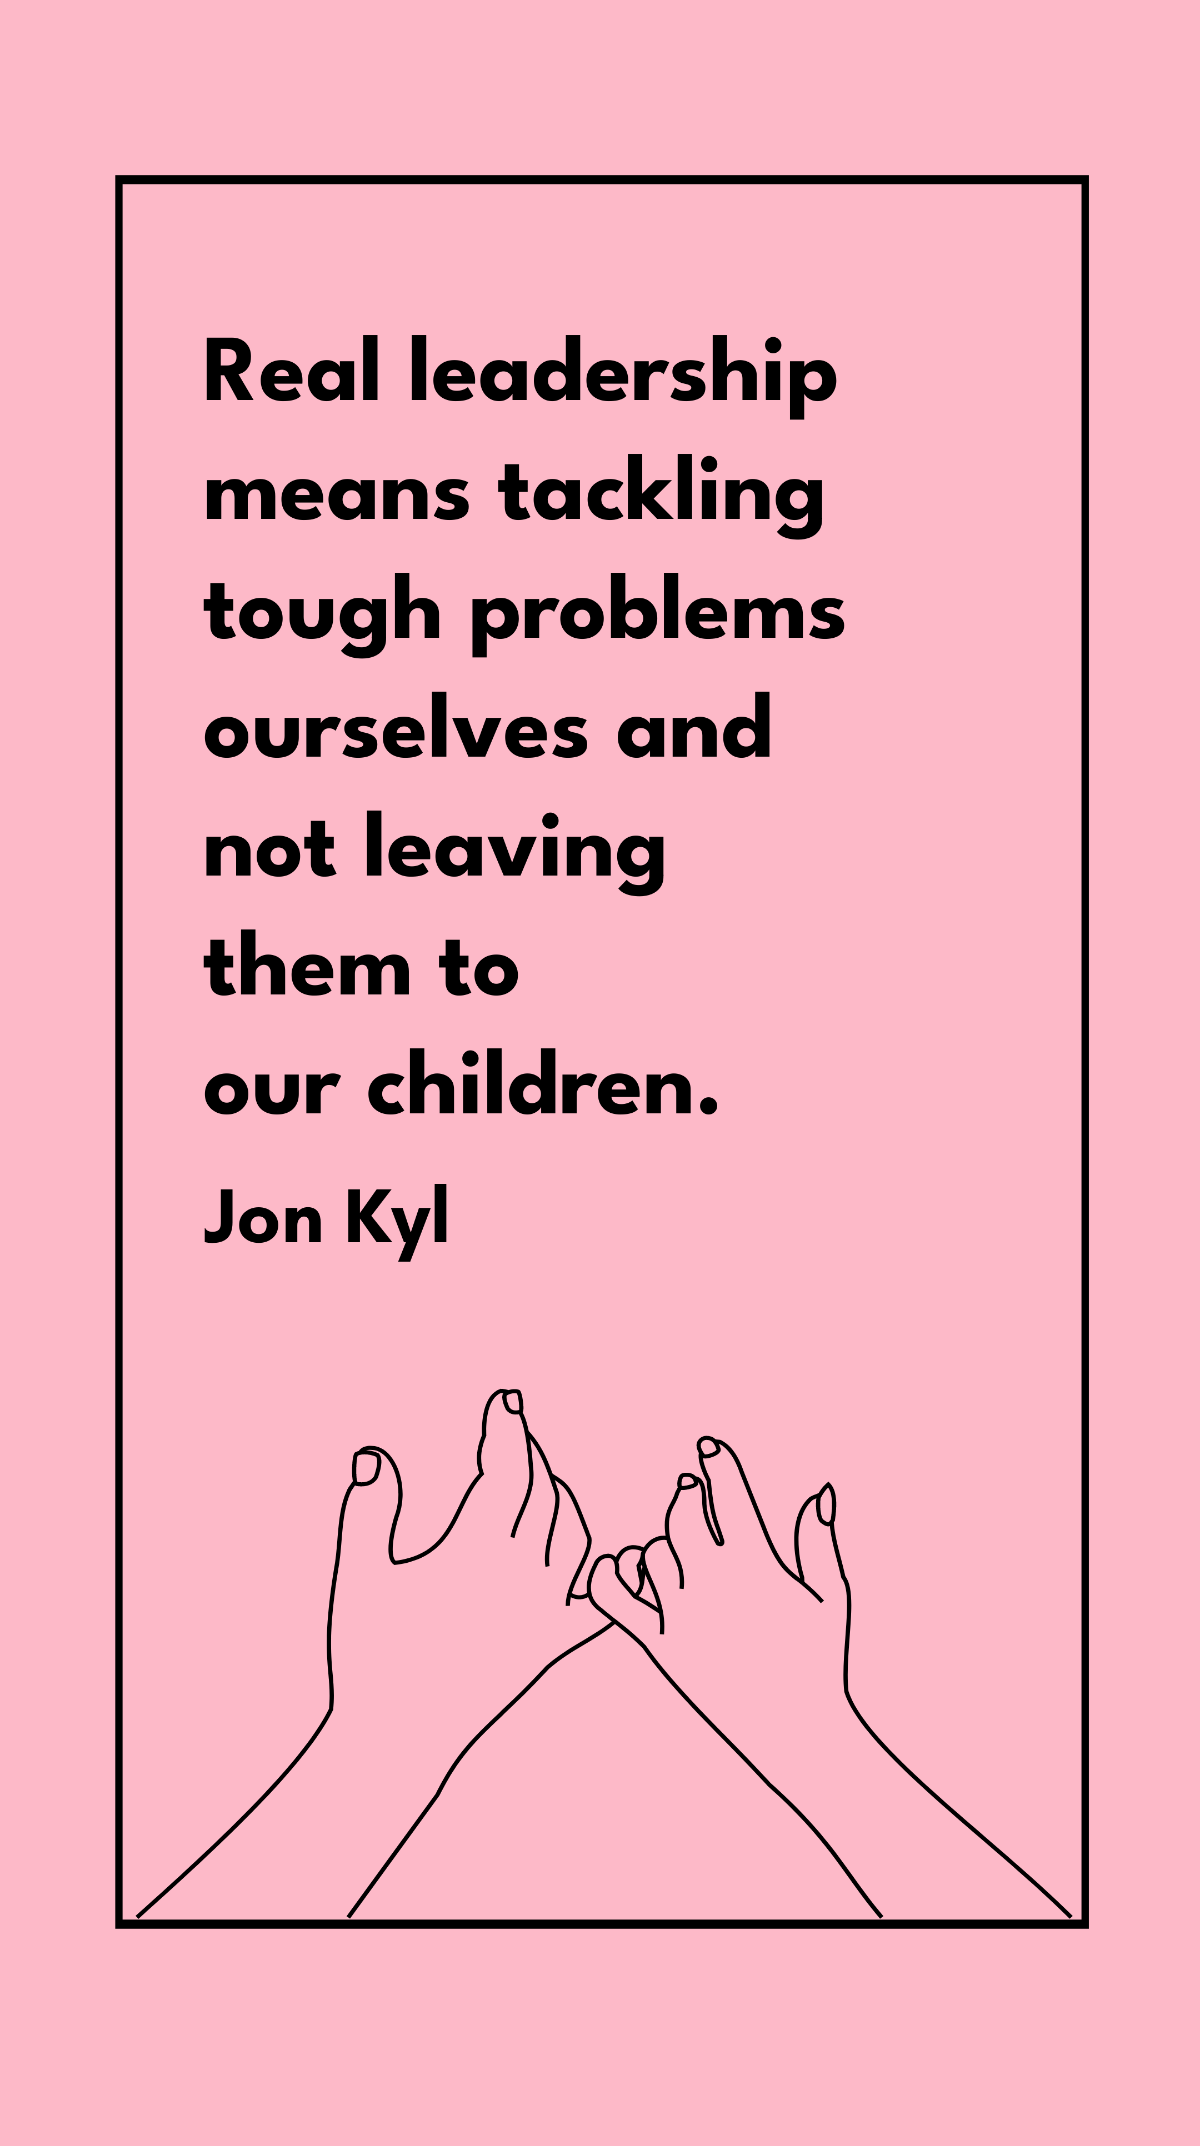 Jon Kyl - Real leadership means tackling tough problems ourselves and not leaving them to our children. Template